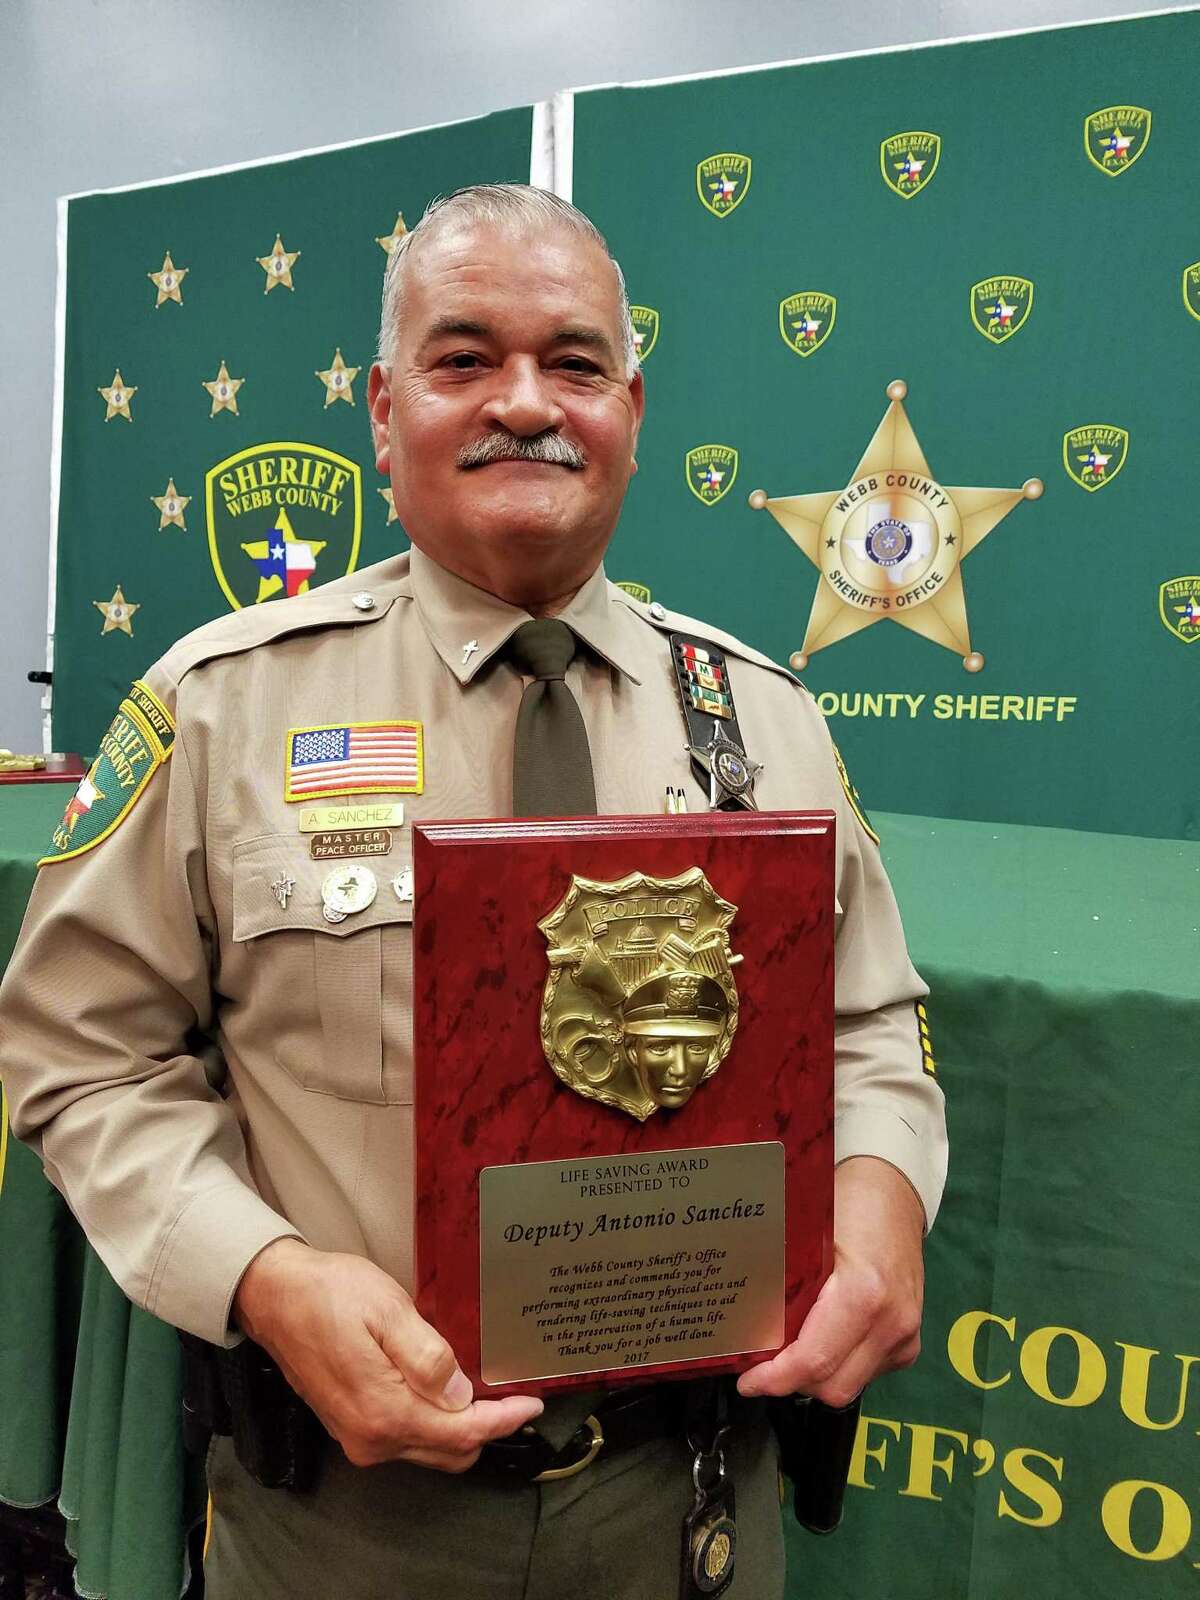 Webb County Sheriff’s Office Deputy Antonio Sanchez was honored with a Life Saving Award. Sanchez jumped inside a moving vehicle and stopped it before injuring children.